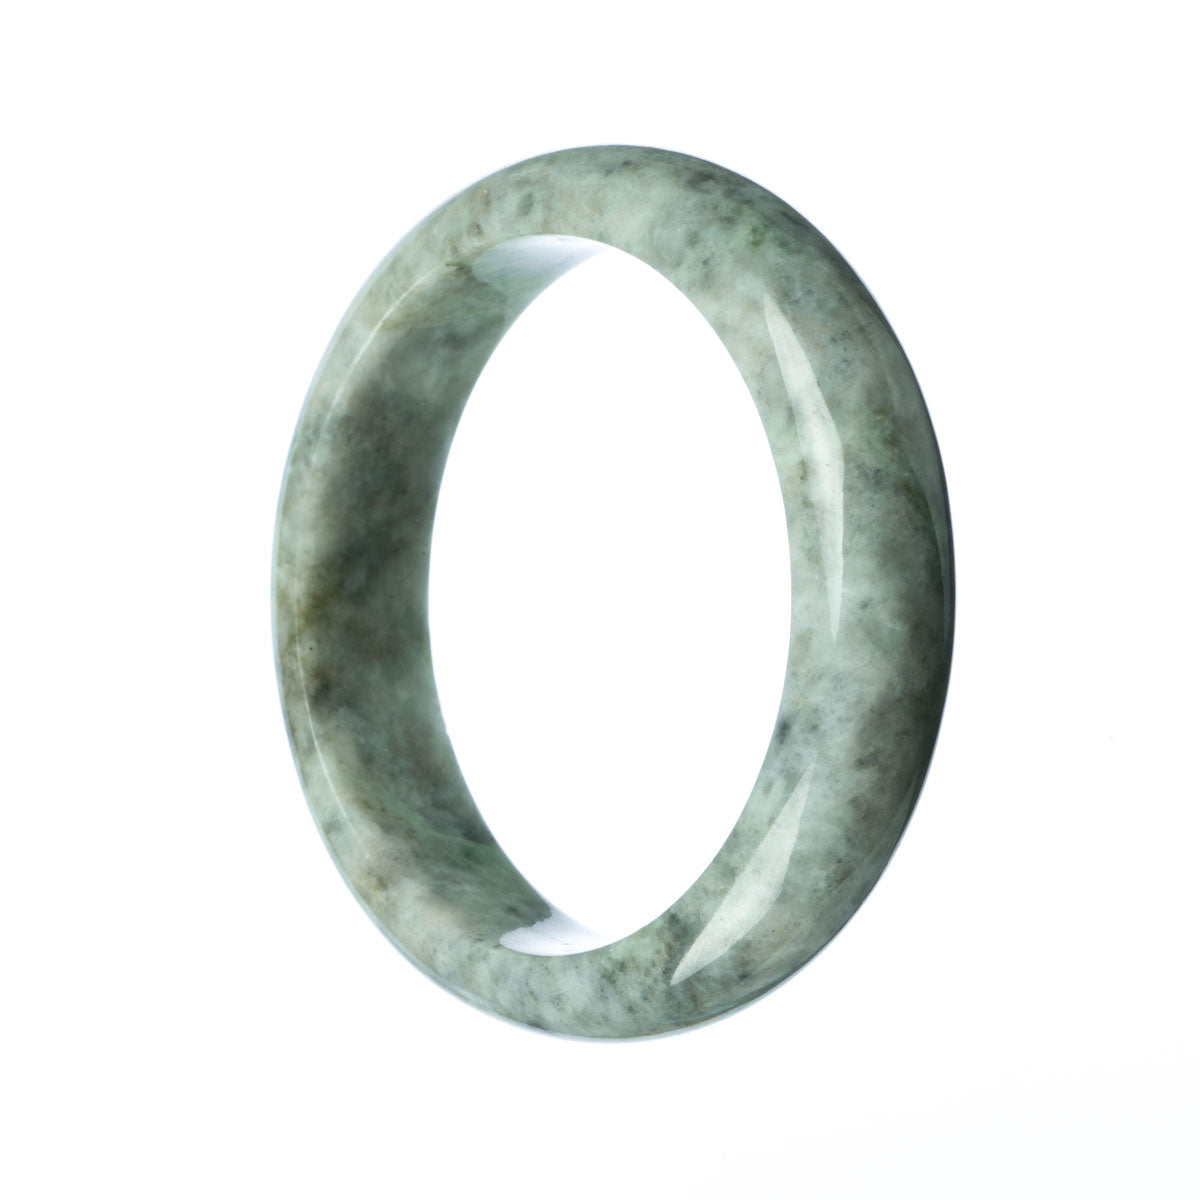 A close-up image of an Authentic Grade A Grey Jadeite Jade Bangle. The bangle is a half-moon shape, measuring 59mm in diameter. It is a high-quality piece from MAYS GEMS.